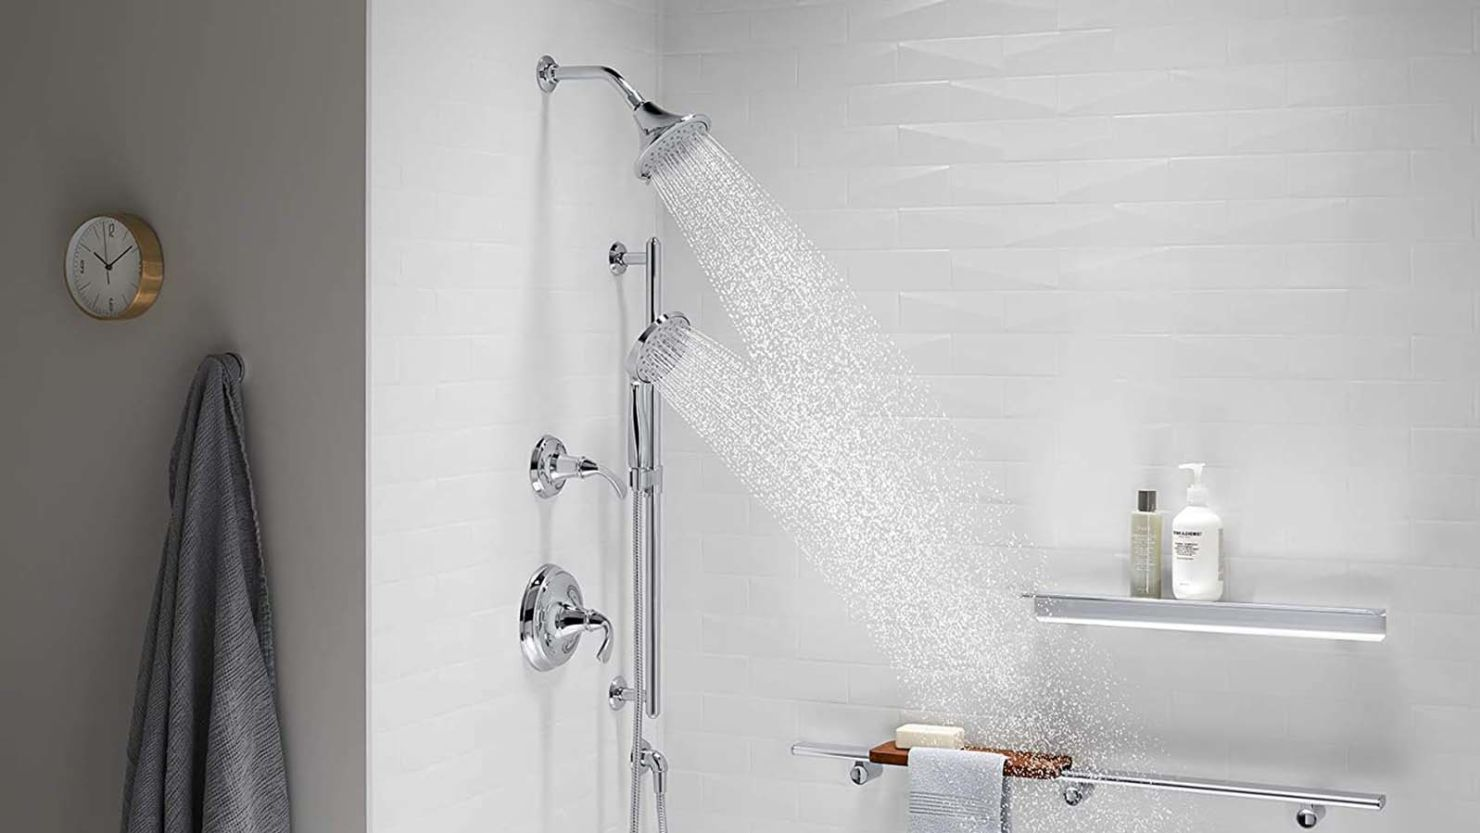 Transform Your Shower Experience With Multi-Function Shower Heads